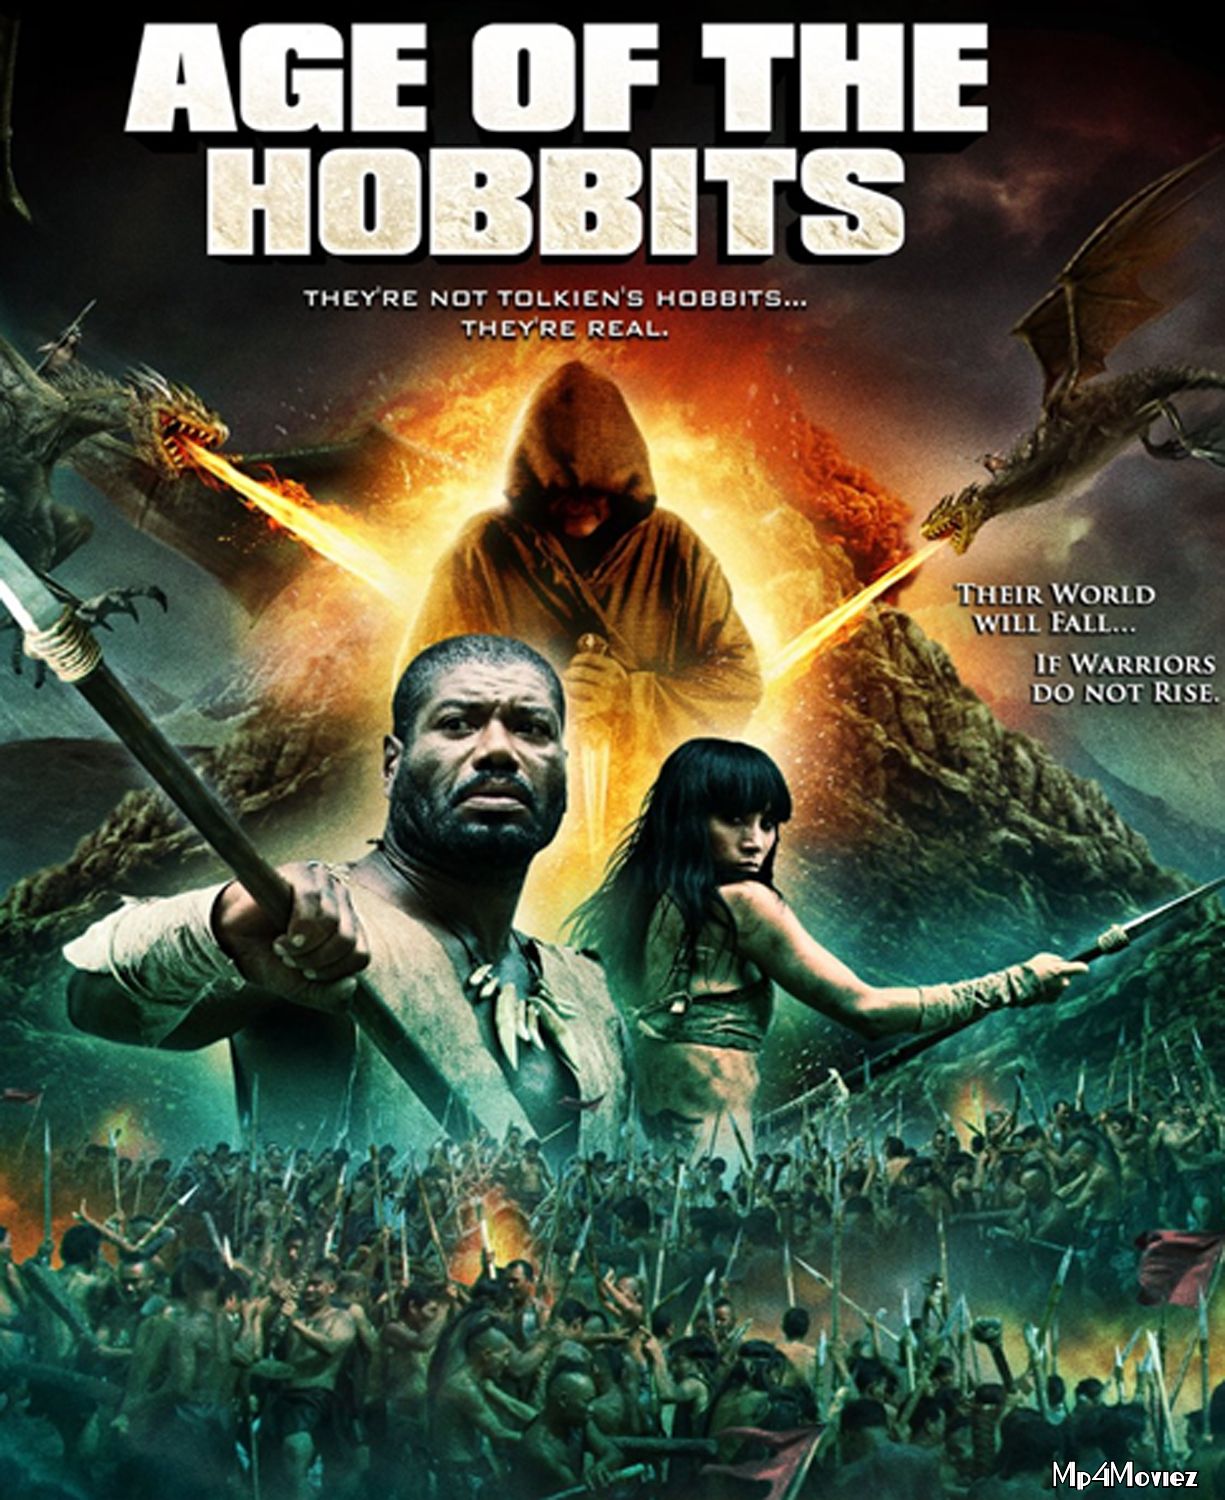 Age of the Hobbits (2012) Hindi Dubbed Movie download full movie